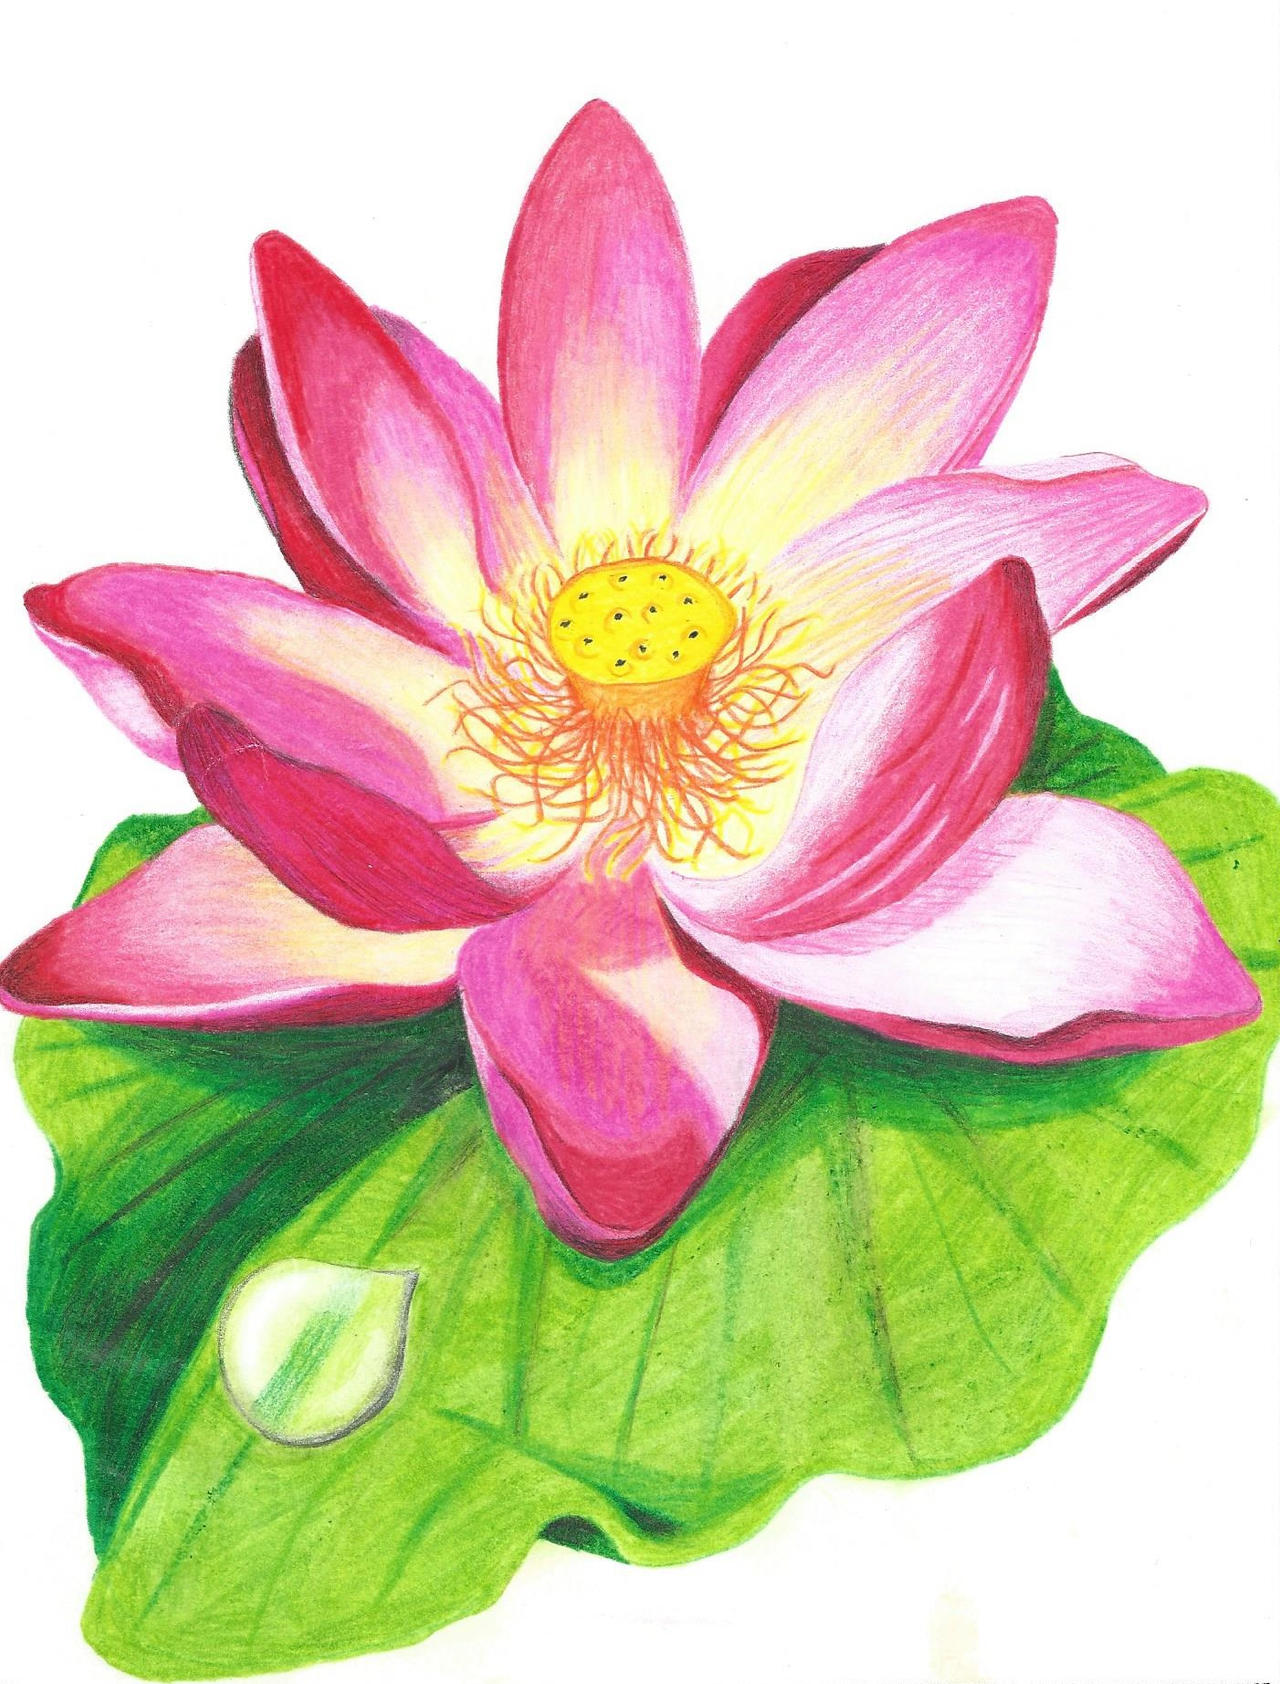 Lotus flower with colored pencil drawing by JenniferNachtigal87 on